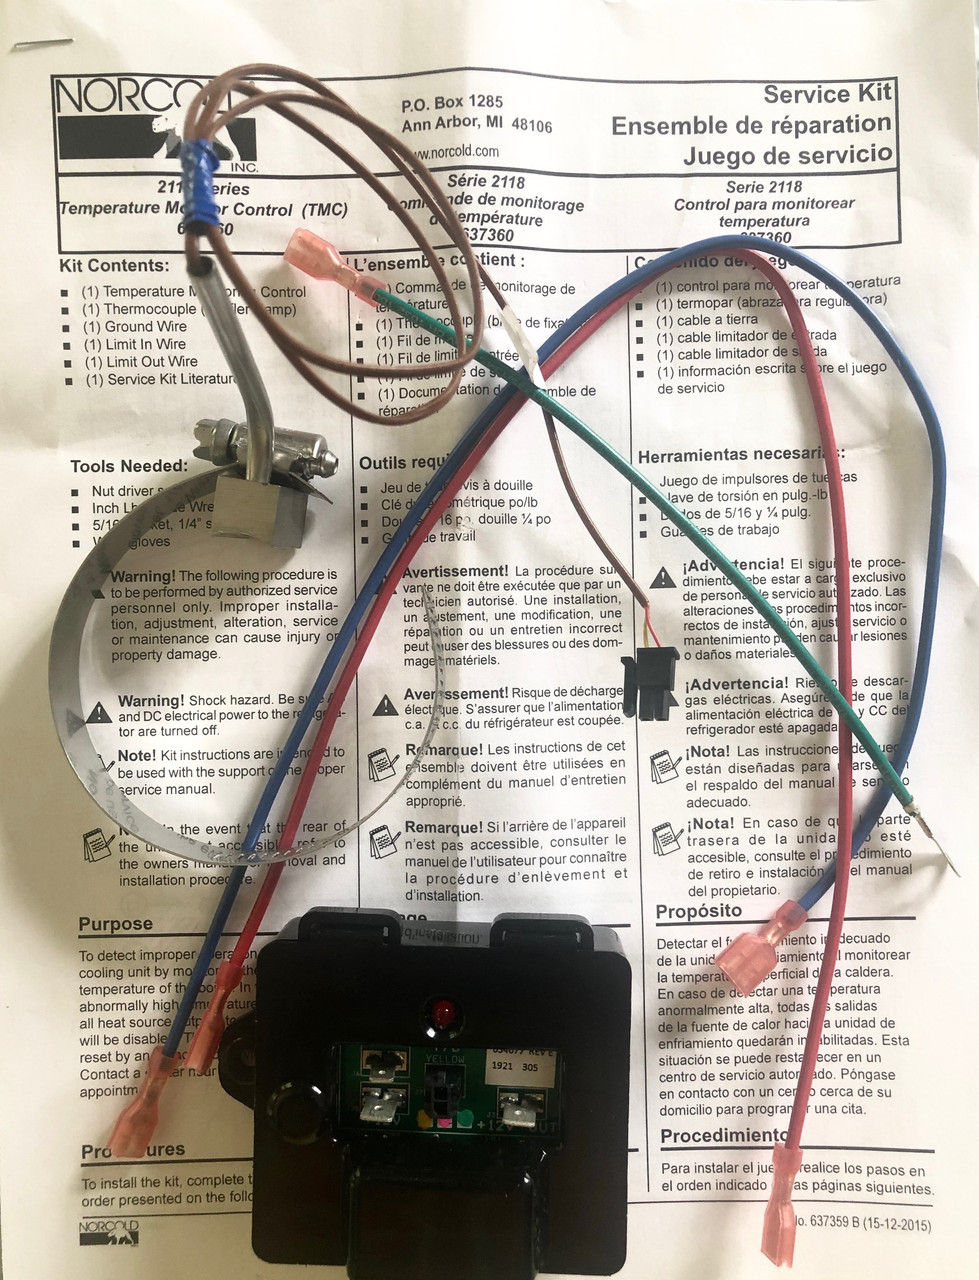 637360 Temp Monitor Control Kit Refrigerator Overheat Sensor for 2118 and  1210 Models Ensure Optimal Cooling and Safety Protect Your RV Refrigerator